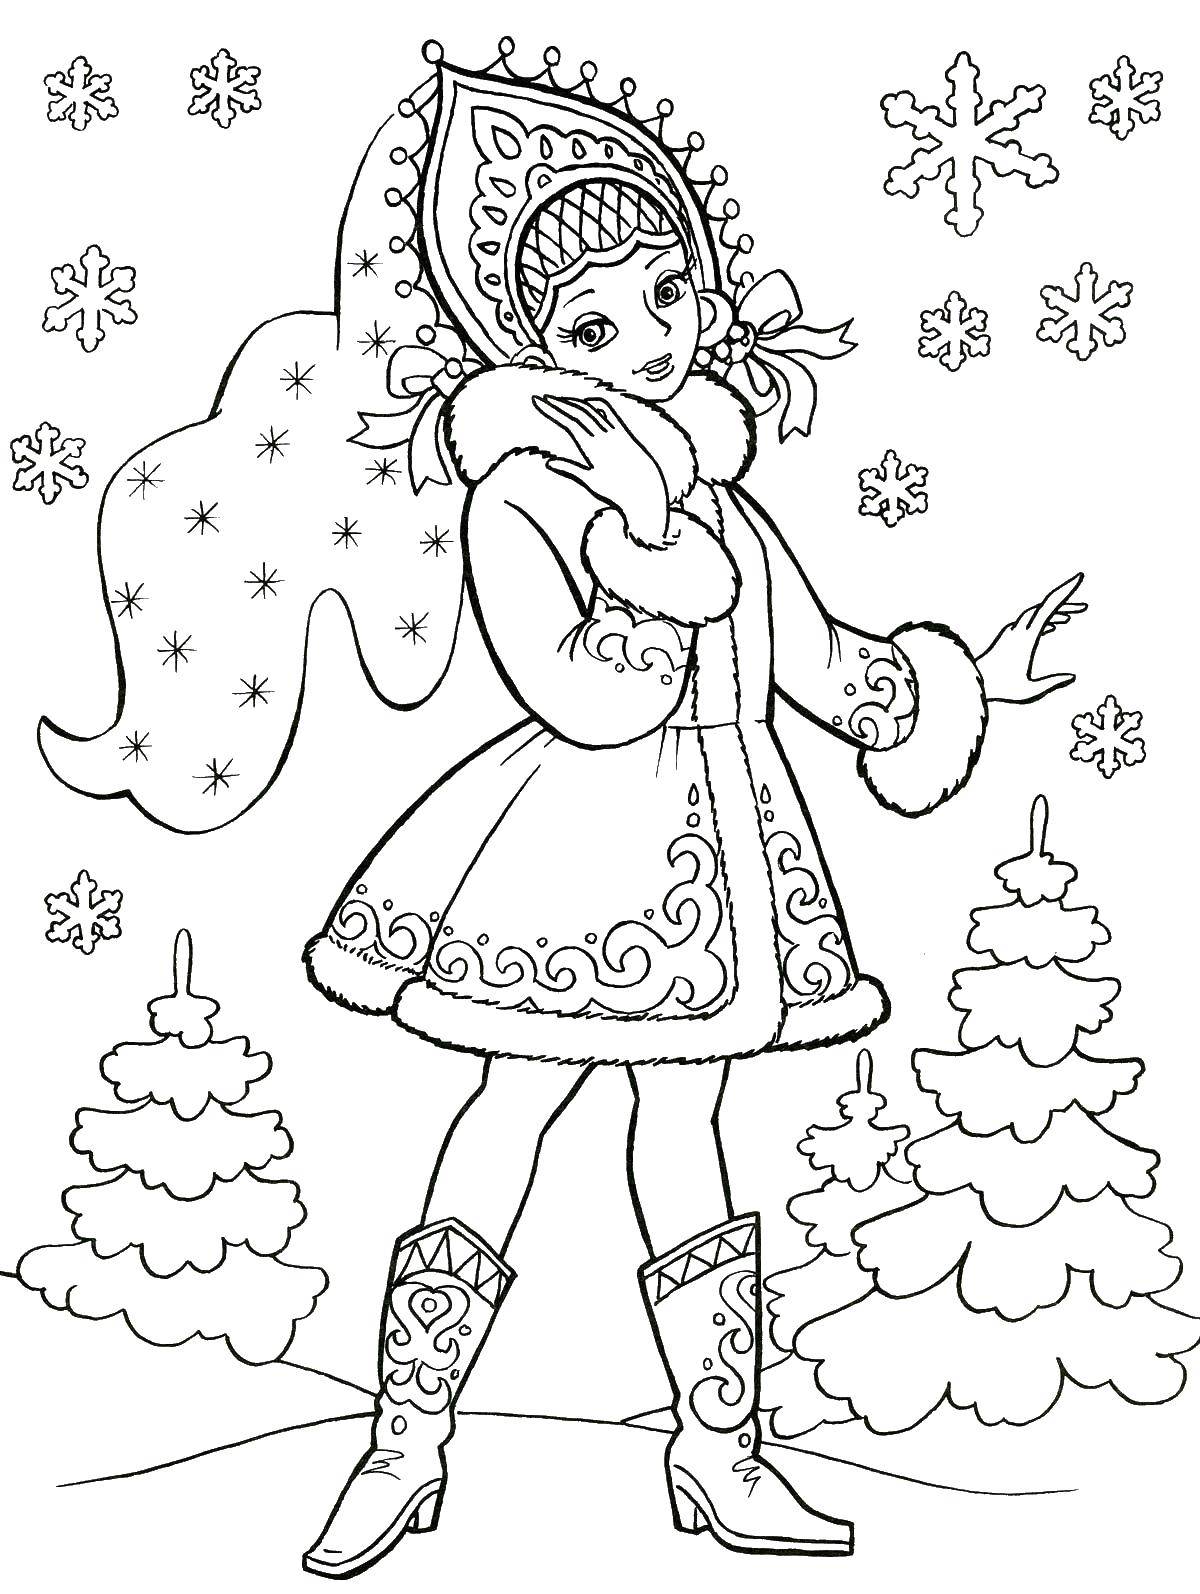 Coloring Christmas trees and snow maiden. Category the tale of Snegurochka. Tags:  maiden, headdress, trees.